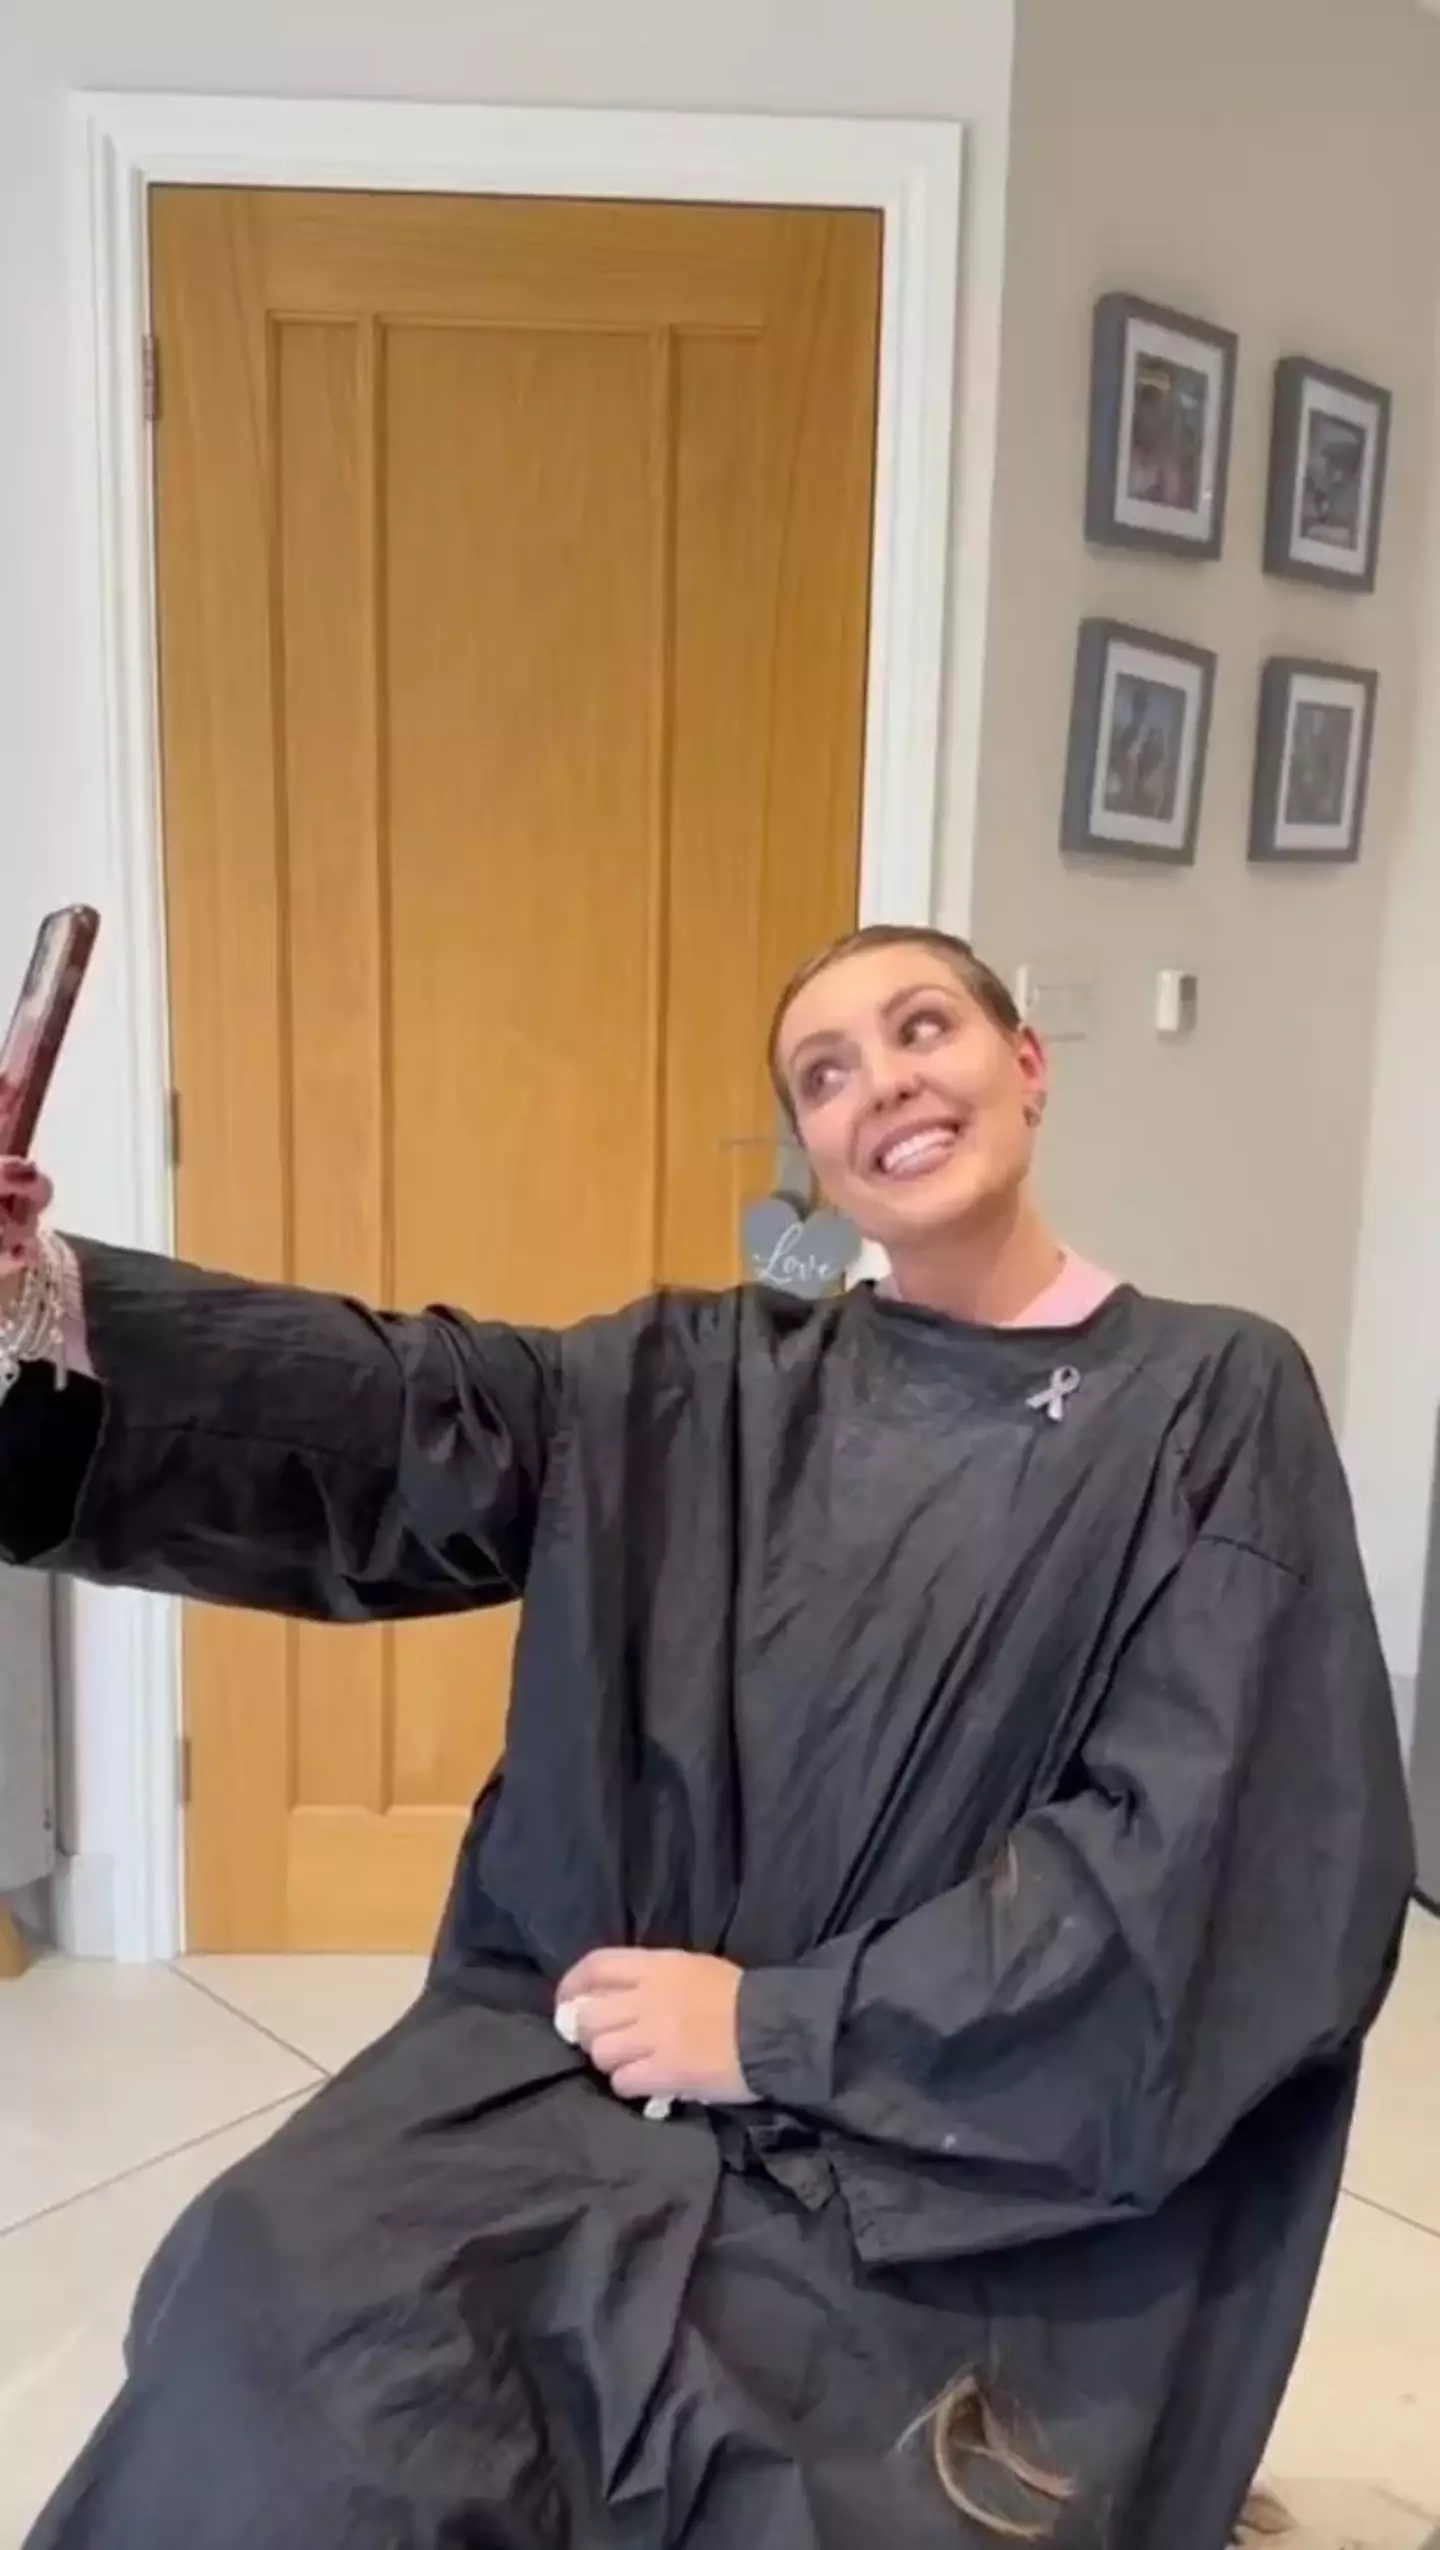 Amy's family helped her to shave her head. Instagram/@Amy_dowden